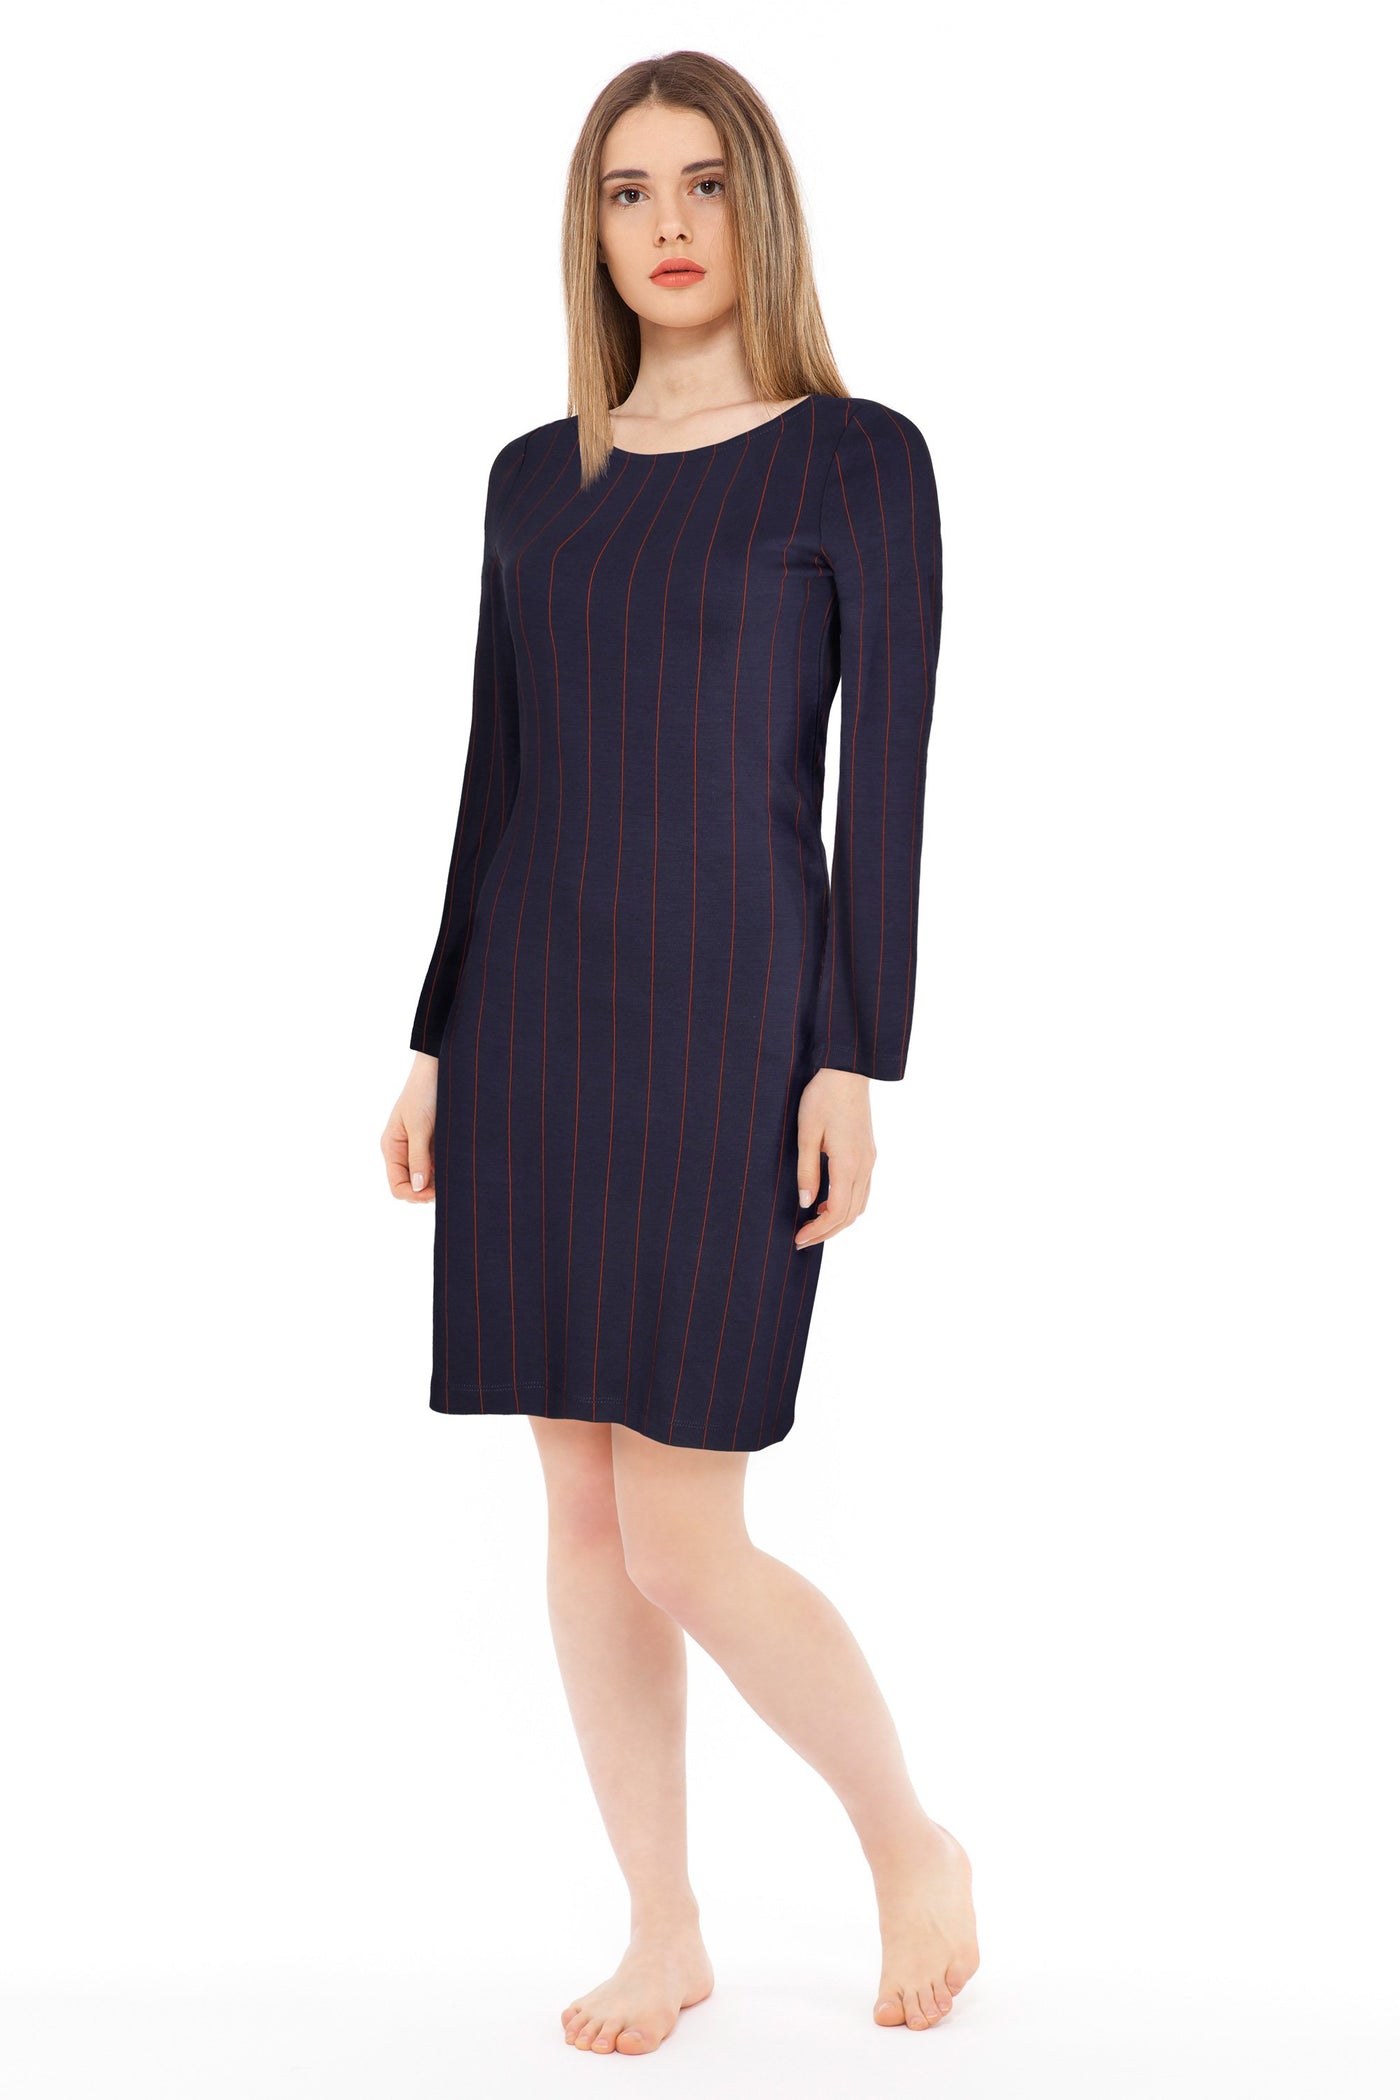 chassca red stripe A-line navy long sleeve midi dress - Breakmood